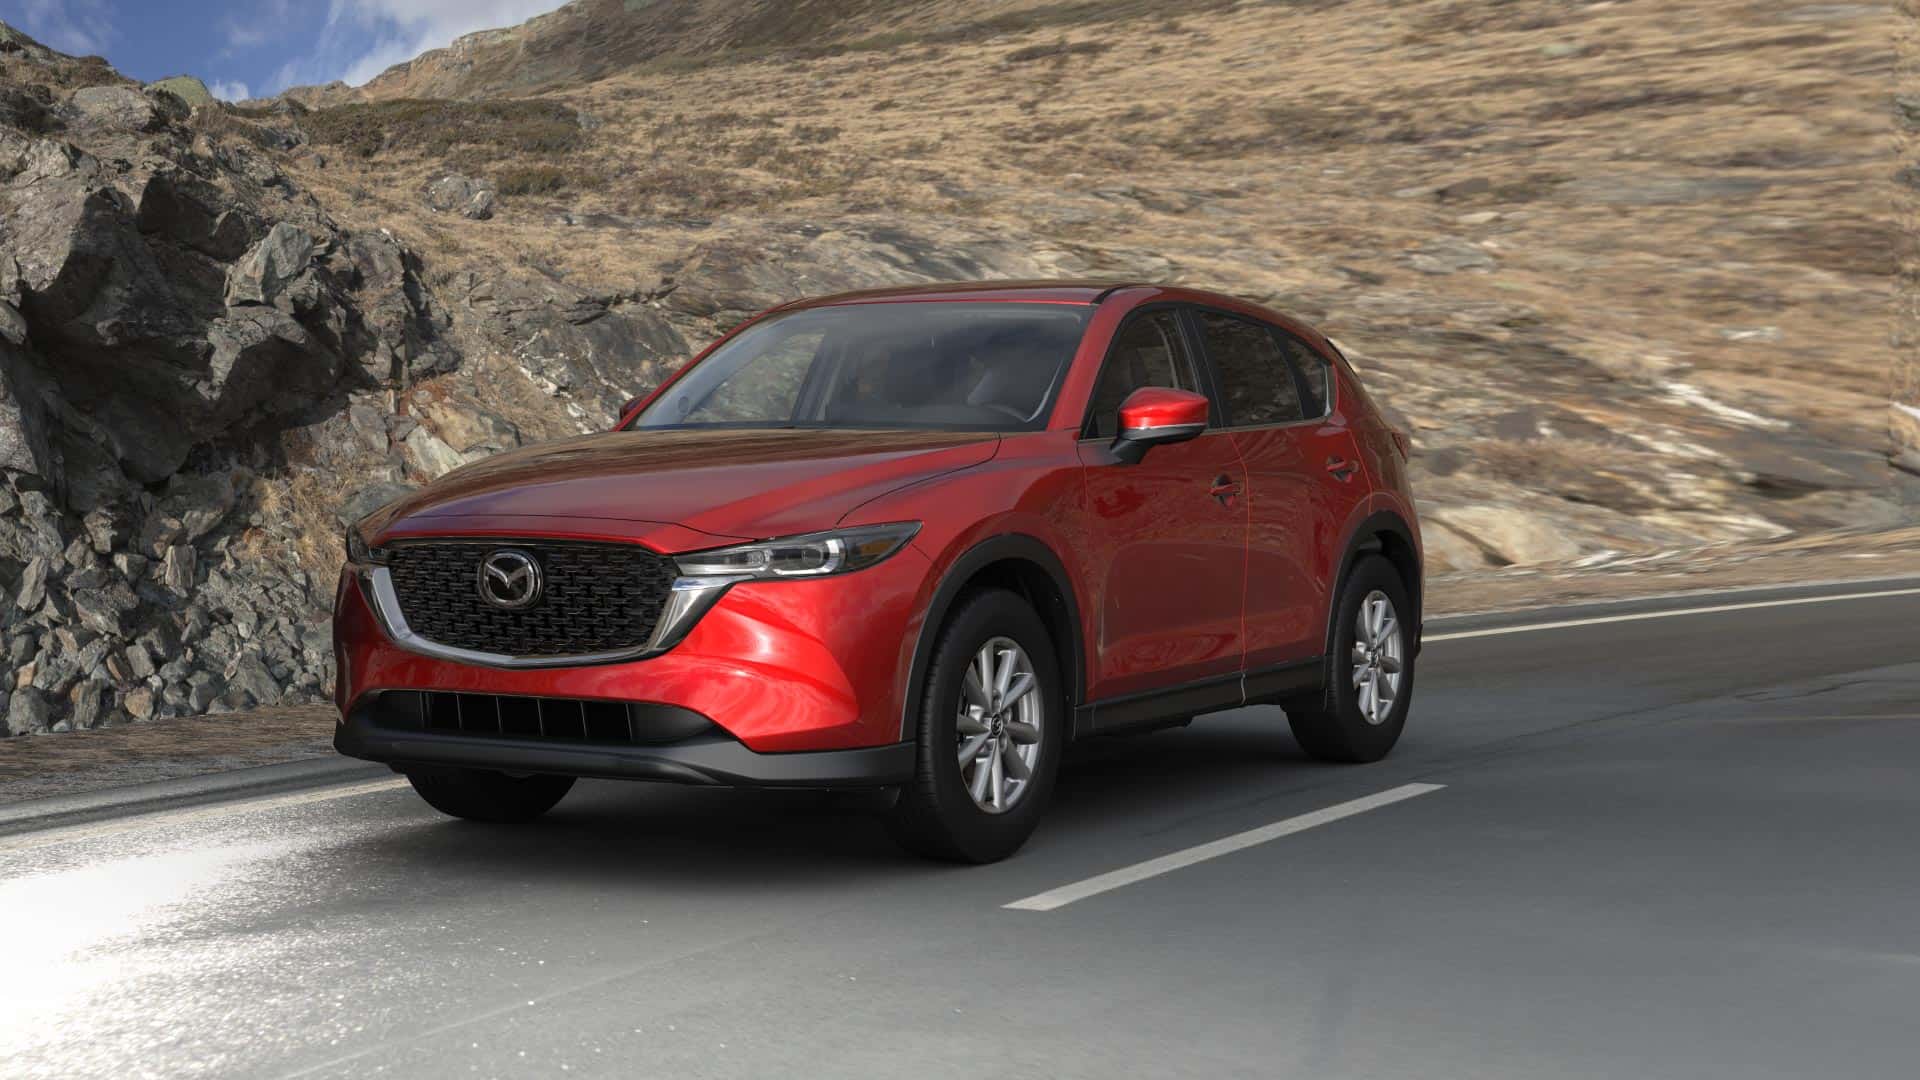 2023 Mazda CX-5 2.5 S Select Soul Red Crystal Metallic | Bommarito Mazda South County in St. Louis MO